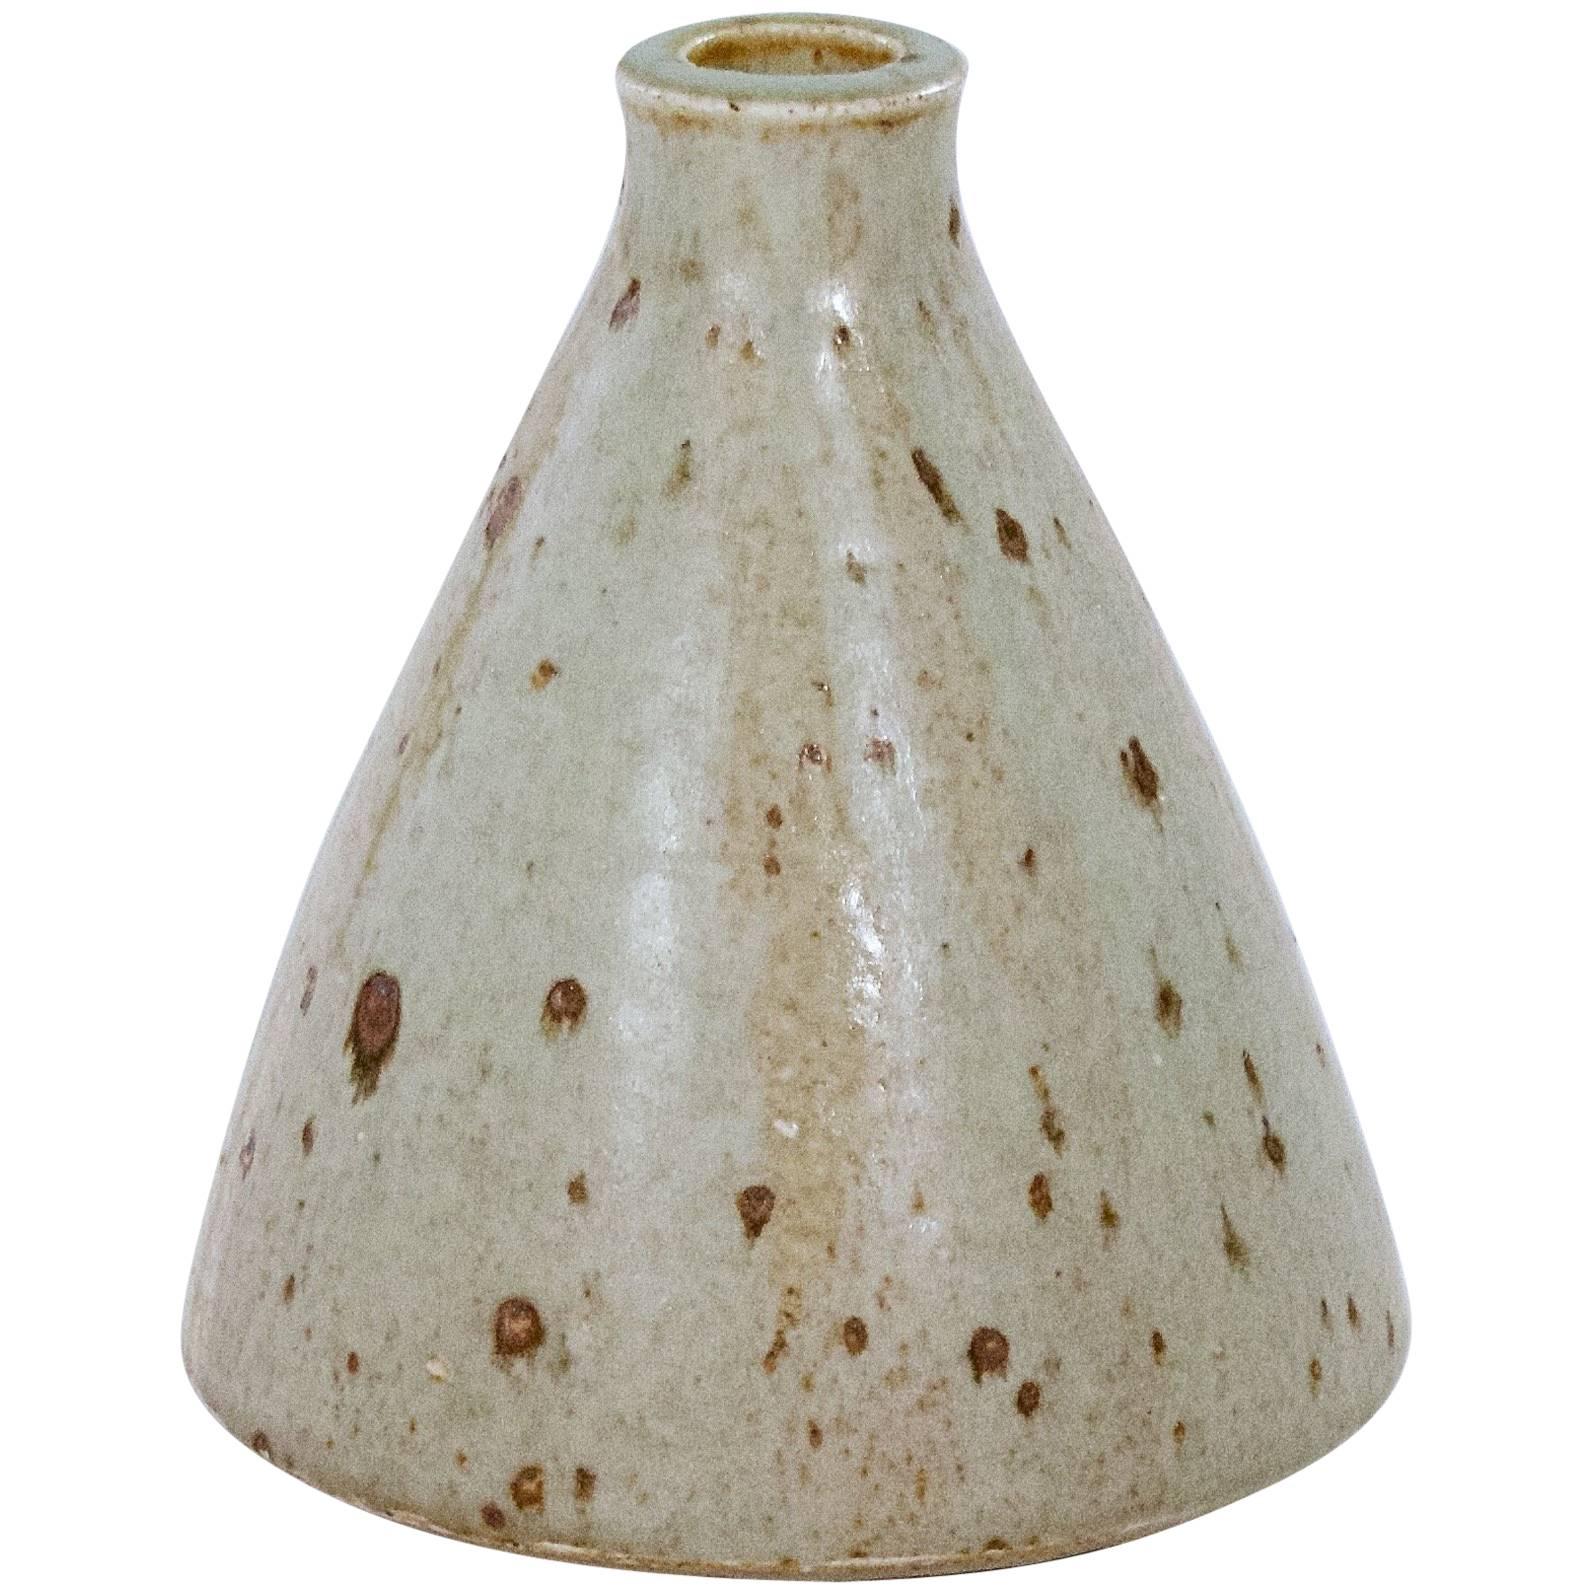 Conical Vase with a Textured Ivory Glaze by Marianne Westman, 1928-2017 For Sale